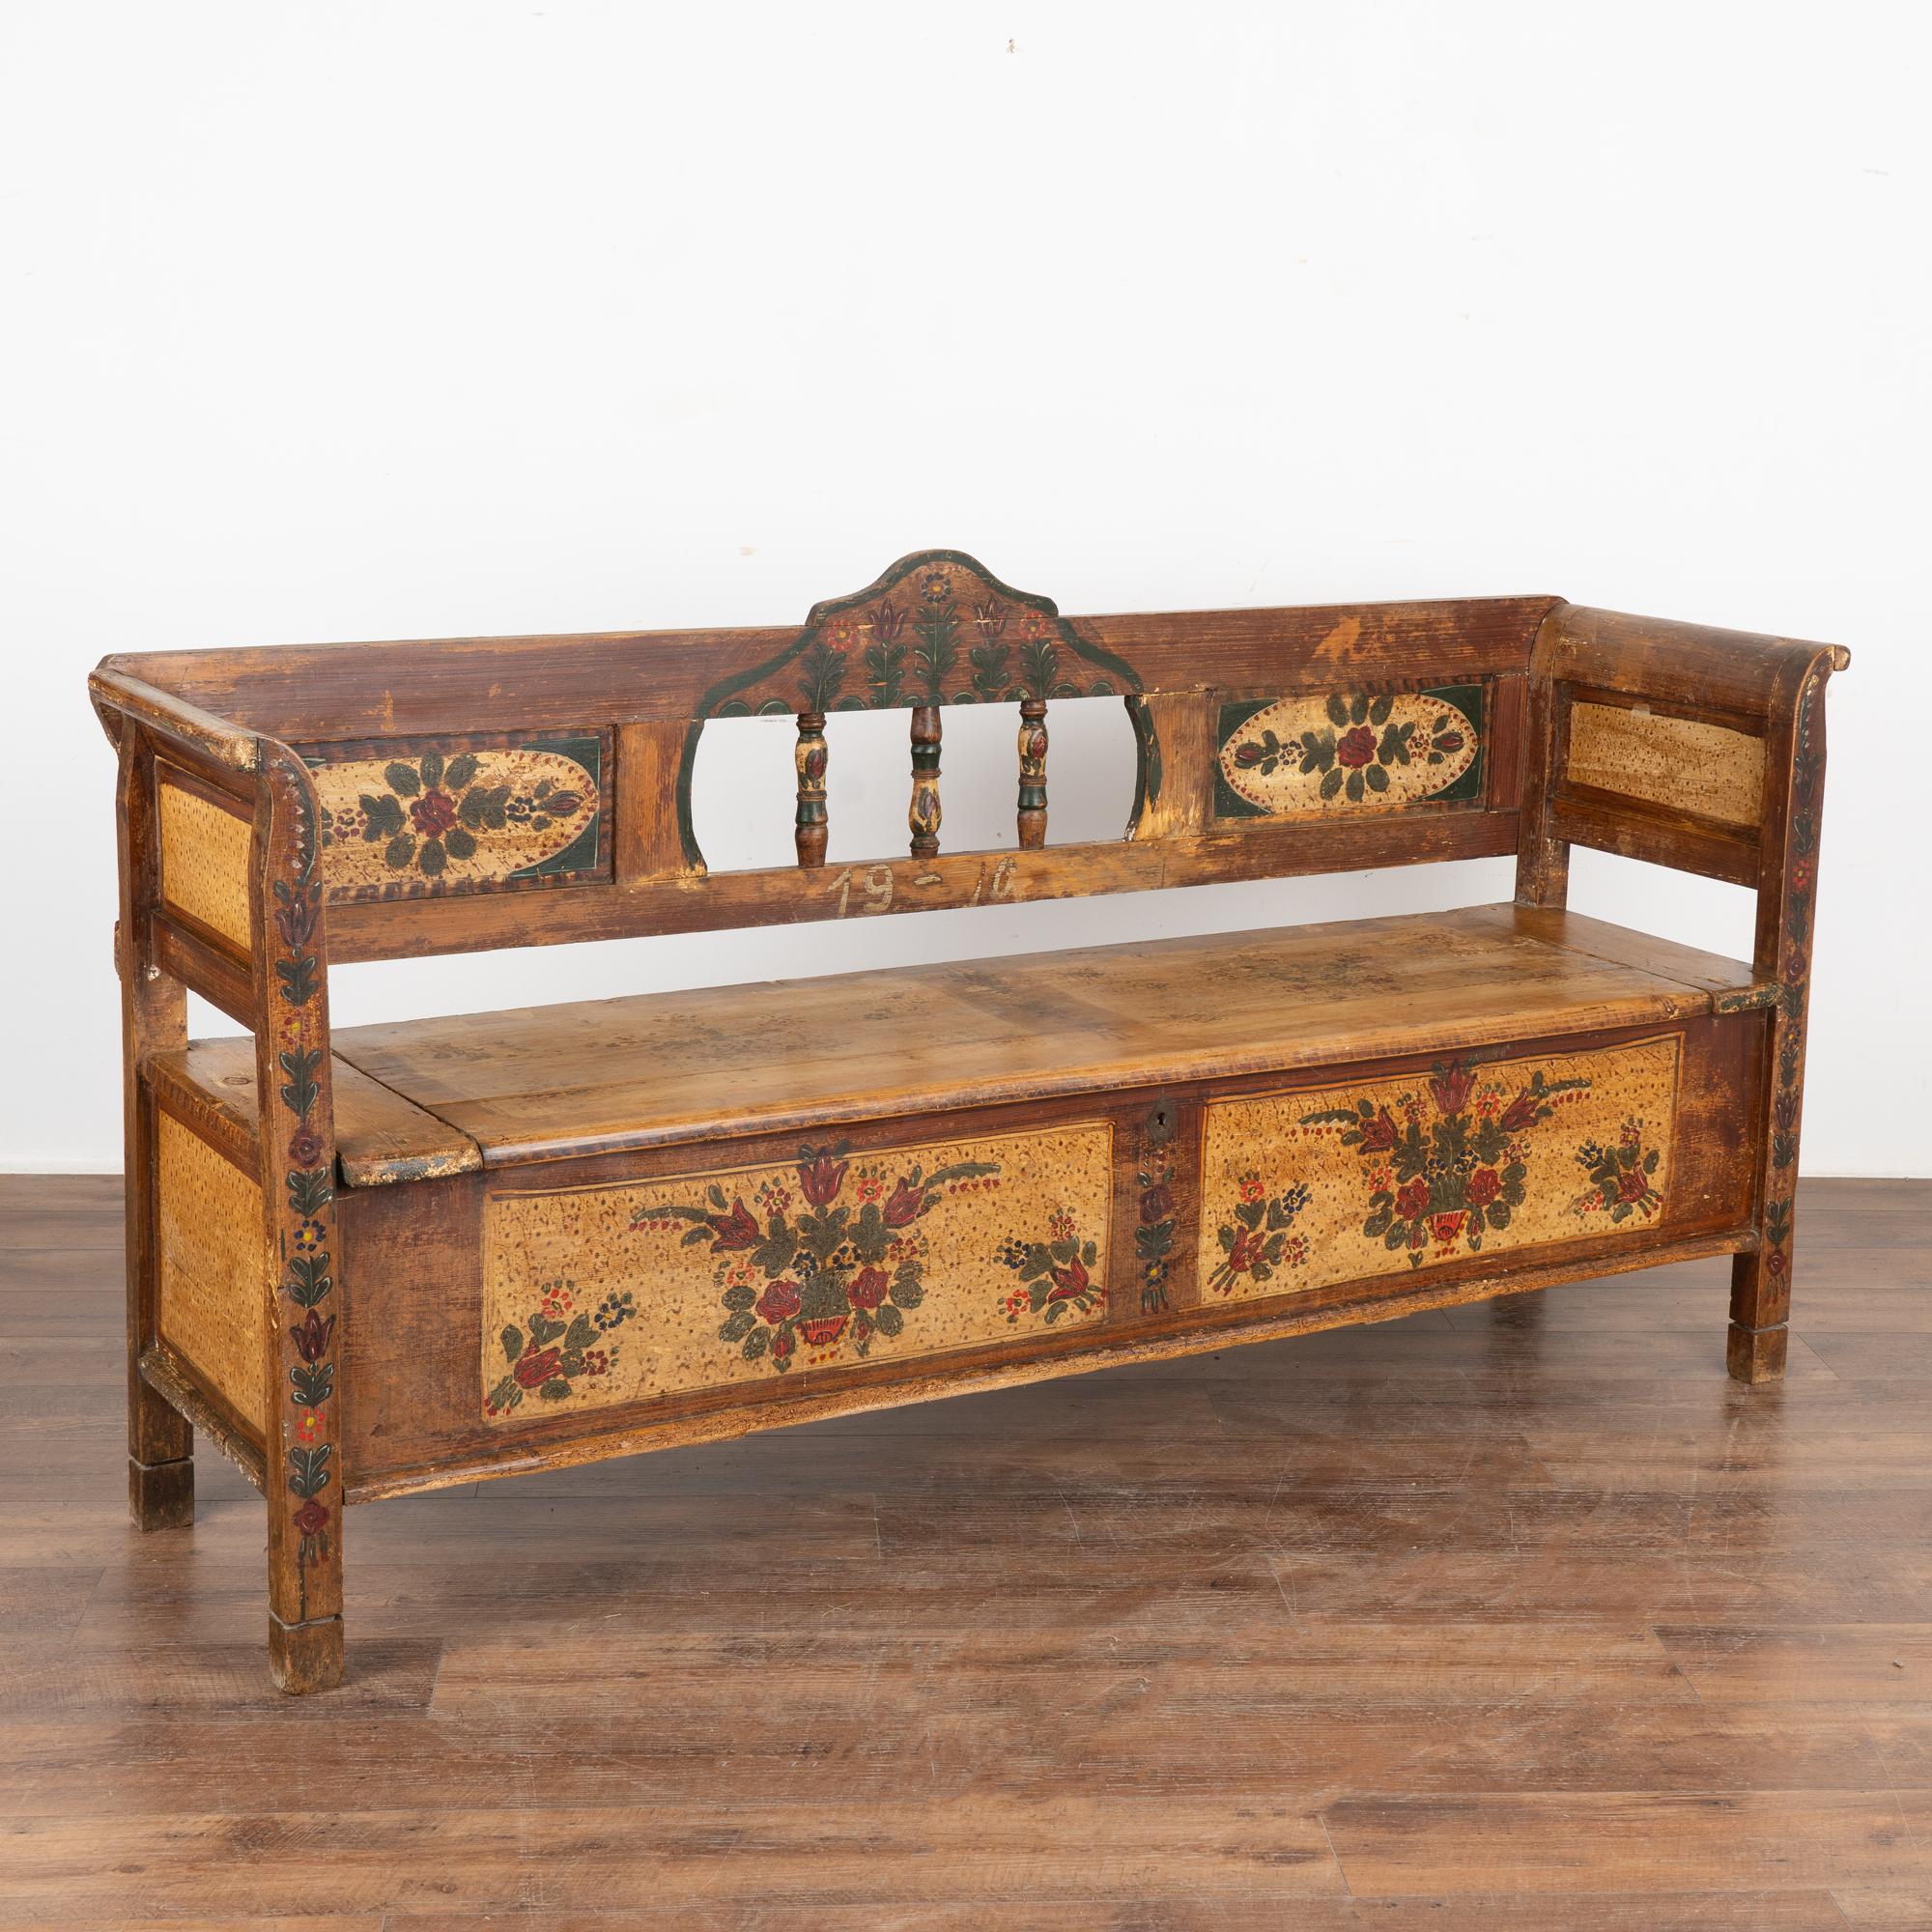 Original hand painted folk art pine bench displays traditional brown faux wood background and colorful floral displays within painted panels in back and front.
Hinged bench seat opens to reveal interior storage.
Restored, cleaned and waxed, this